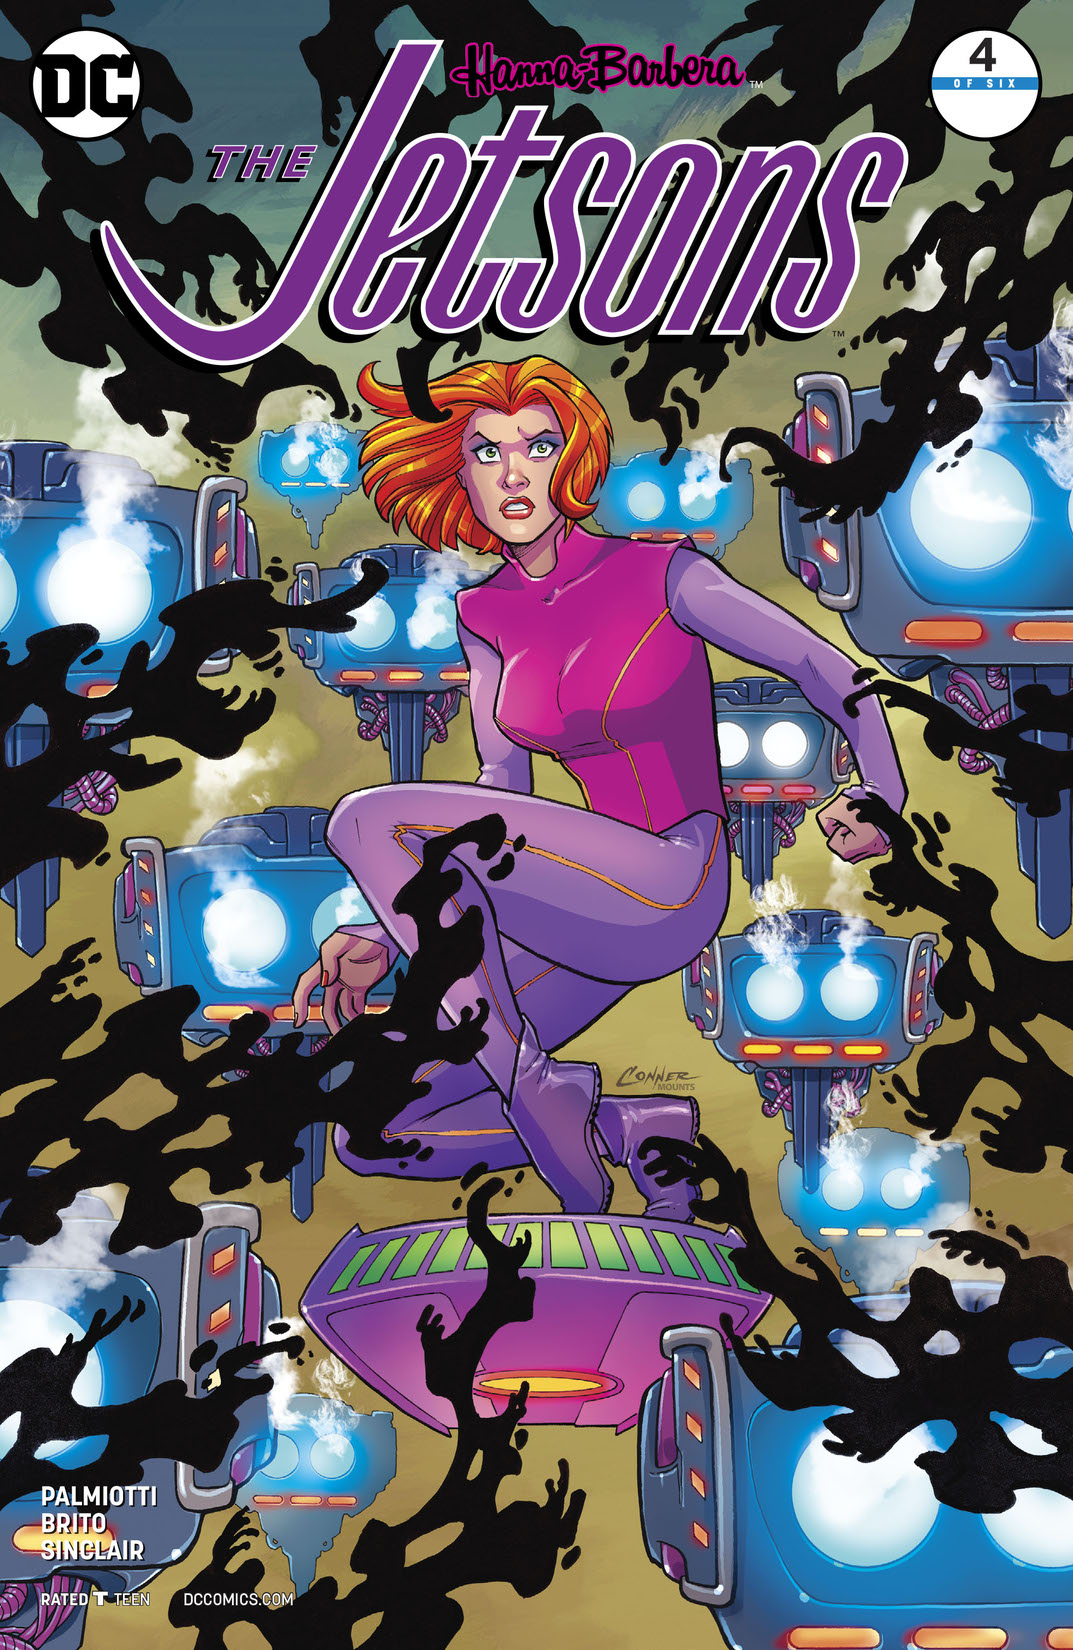 The Jetsons #4 preview images